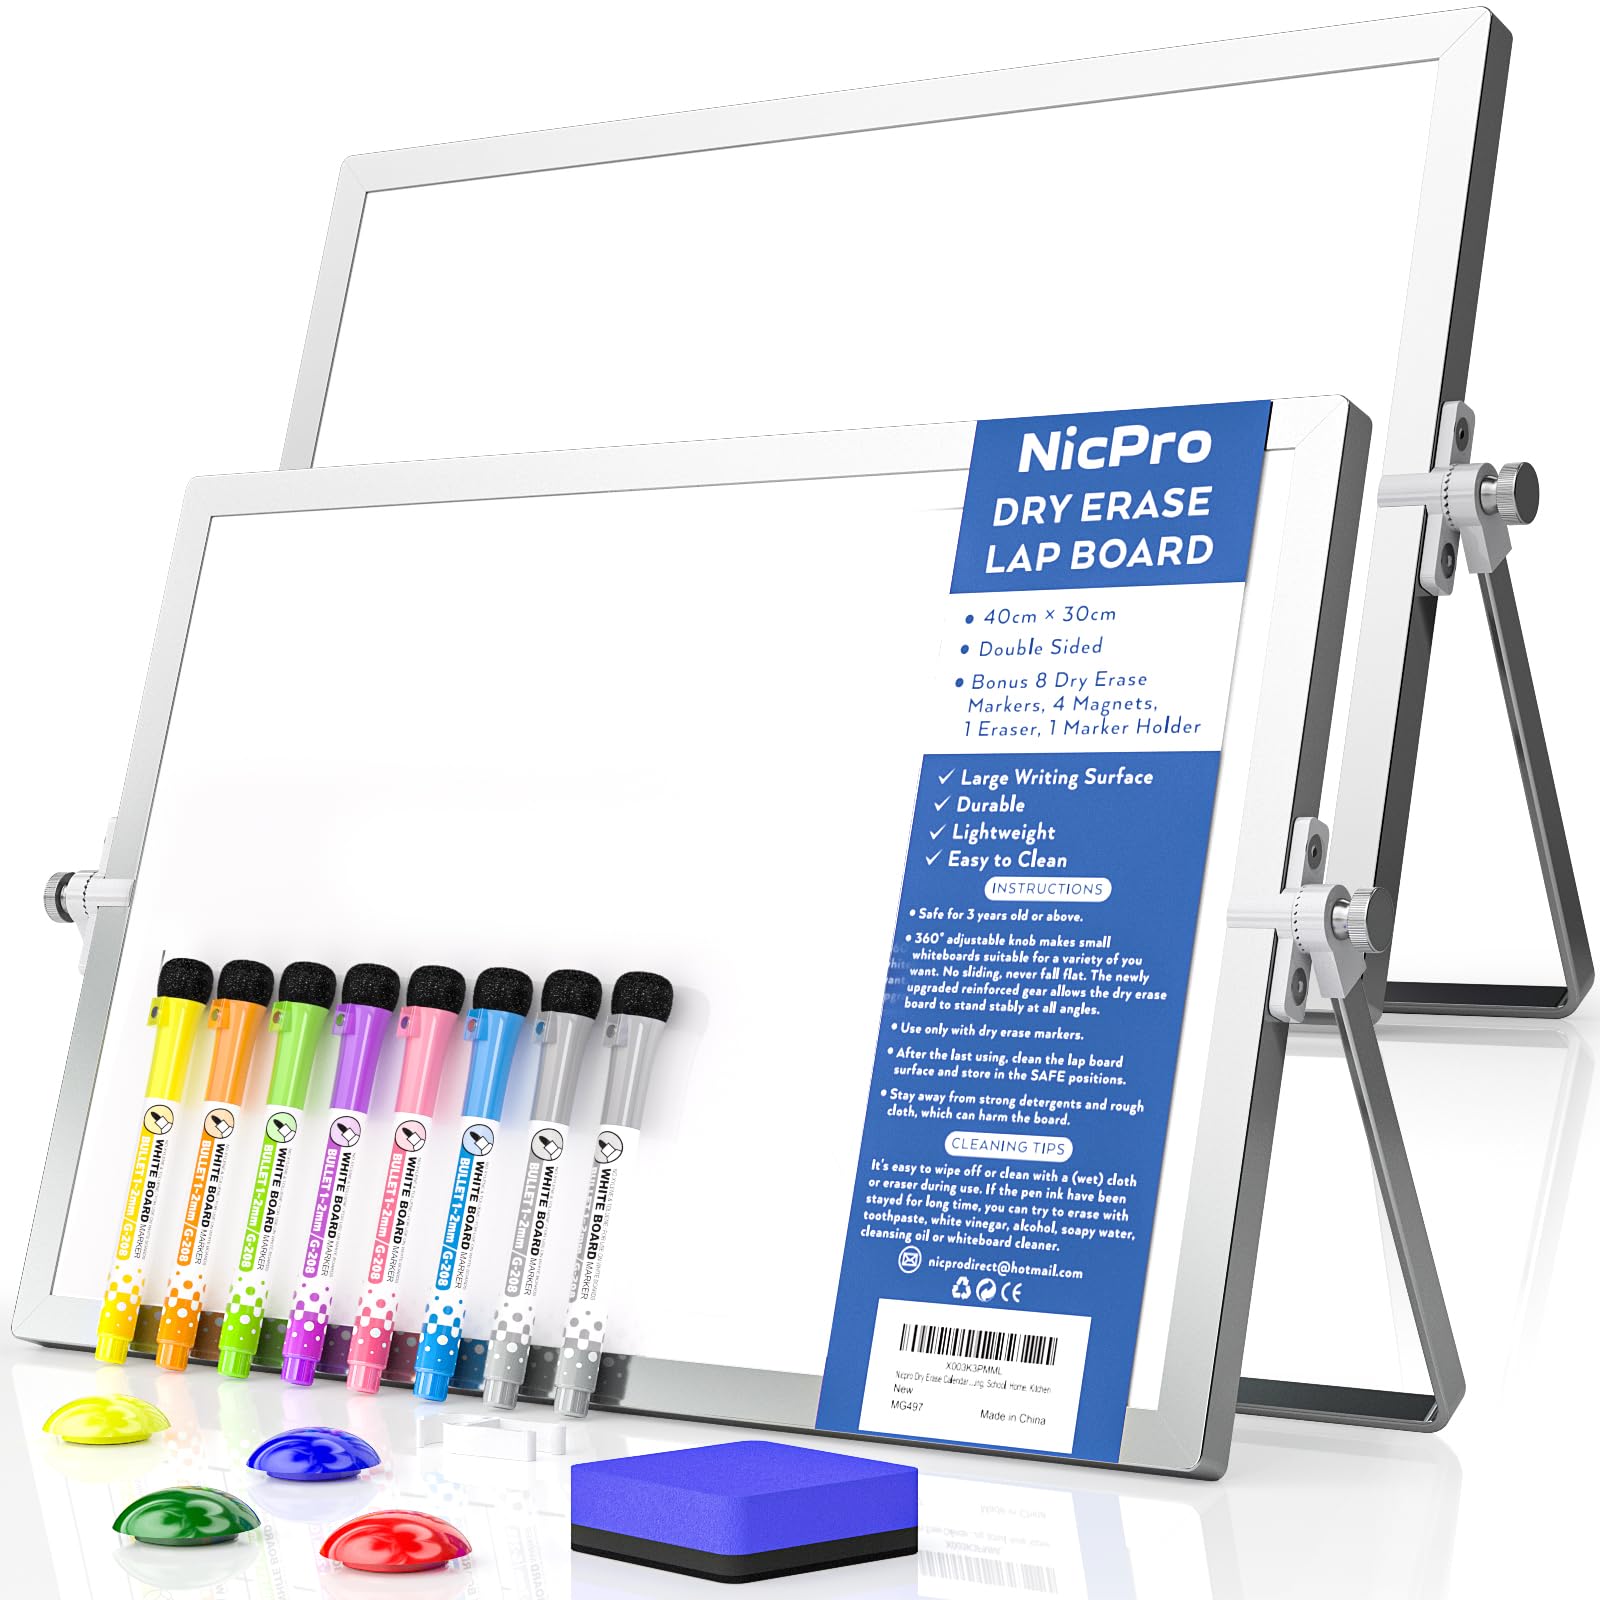 Nicpro Dry Erase Whiteboard, 12 x 16 inch Double Sided Large Magnetic Desktop White Board with Stand, 8 Pens, 1 Eraser, 4 Magnets, White Board Easel